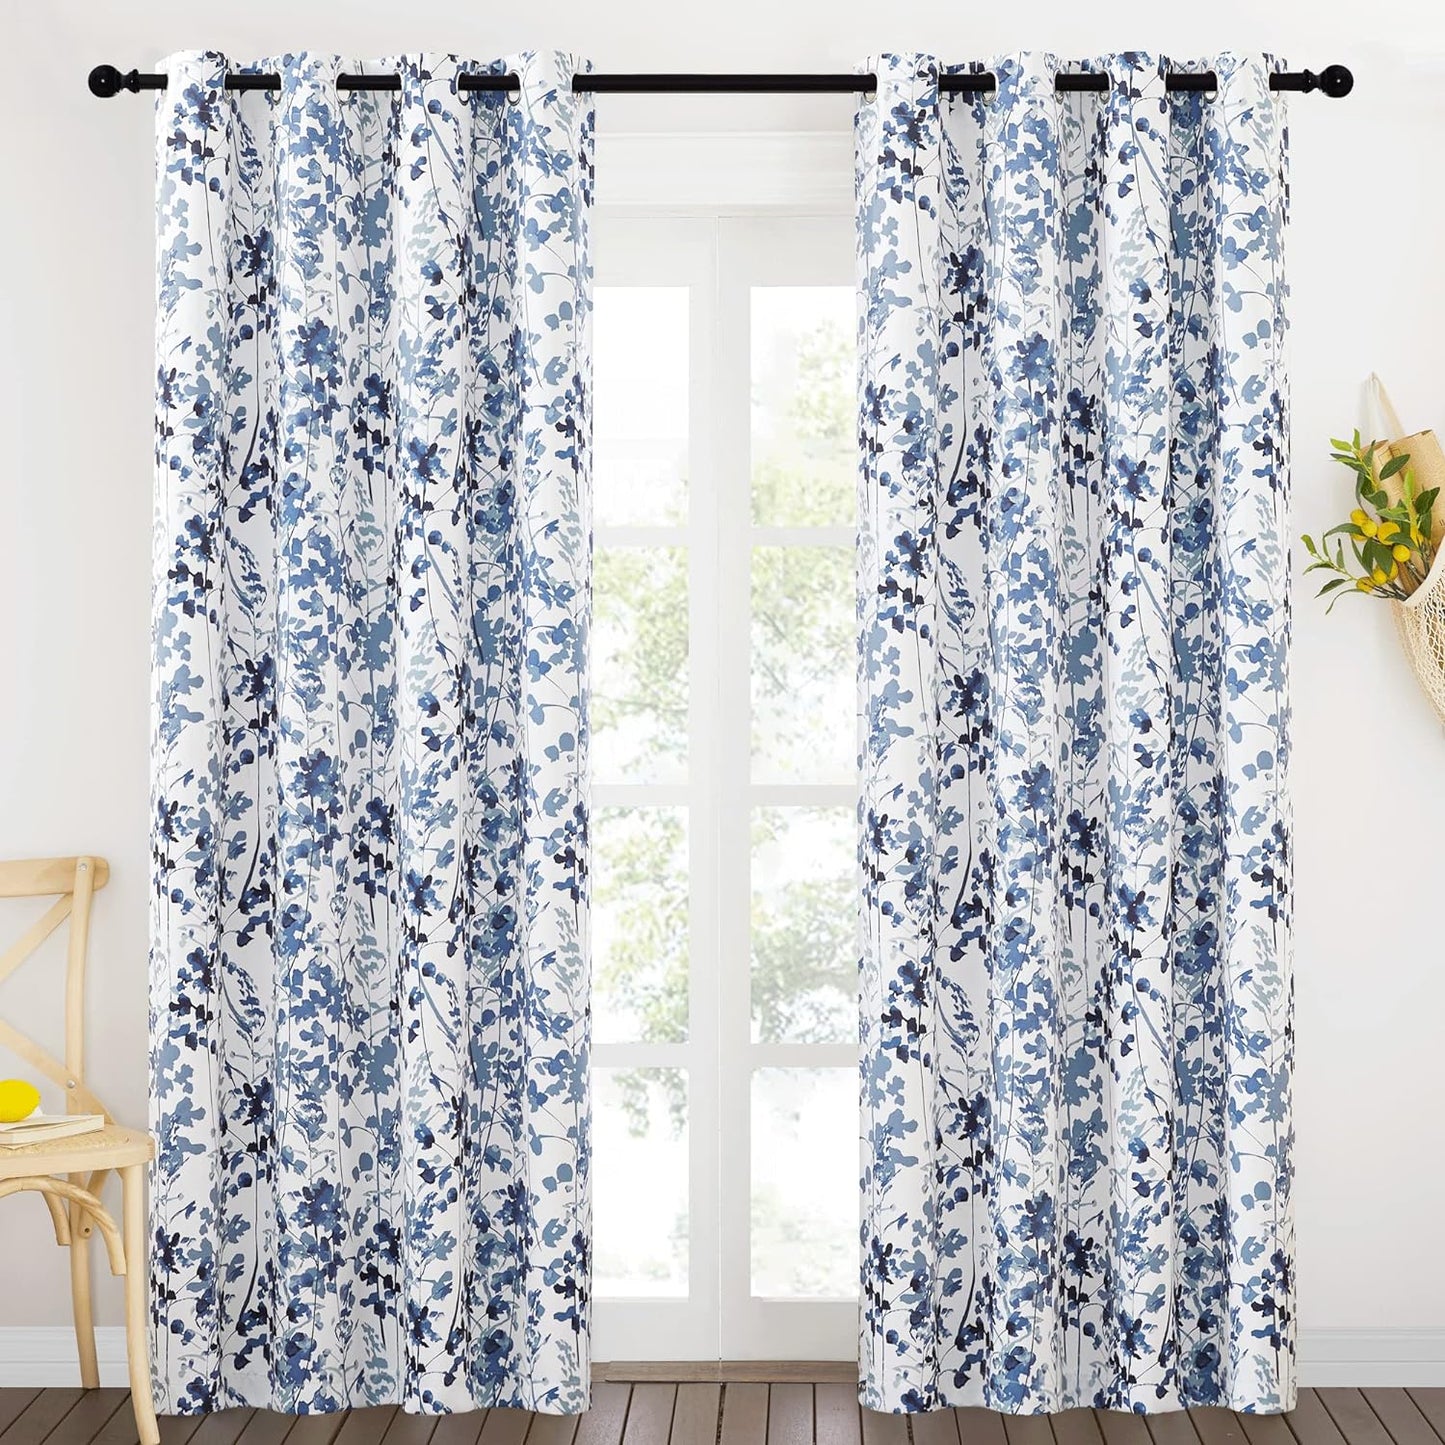 KGORGE Blackout Curtains & Drapes Boho Home/Office Artistic Decor with Vivid Watercolor Floral Painting Thermal Insulated Energy Efficient Shades for Bedroom Living Room (Blue, W 52" X L 84", 1 Pair)  KGORGE   